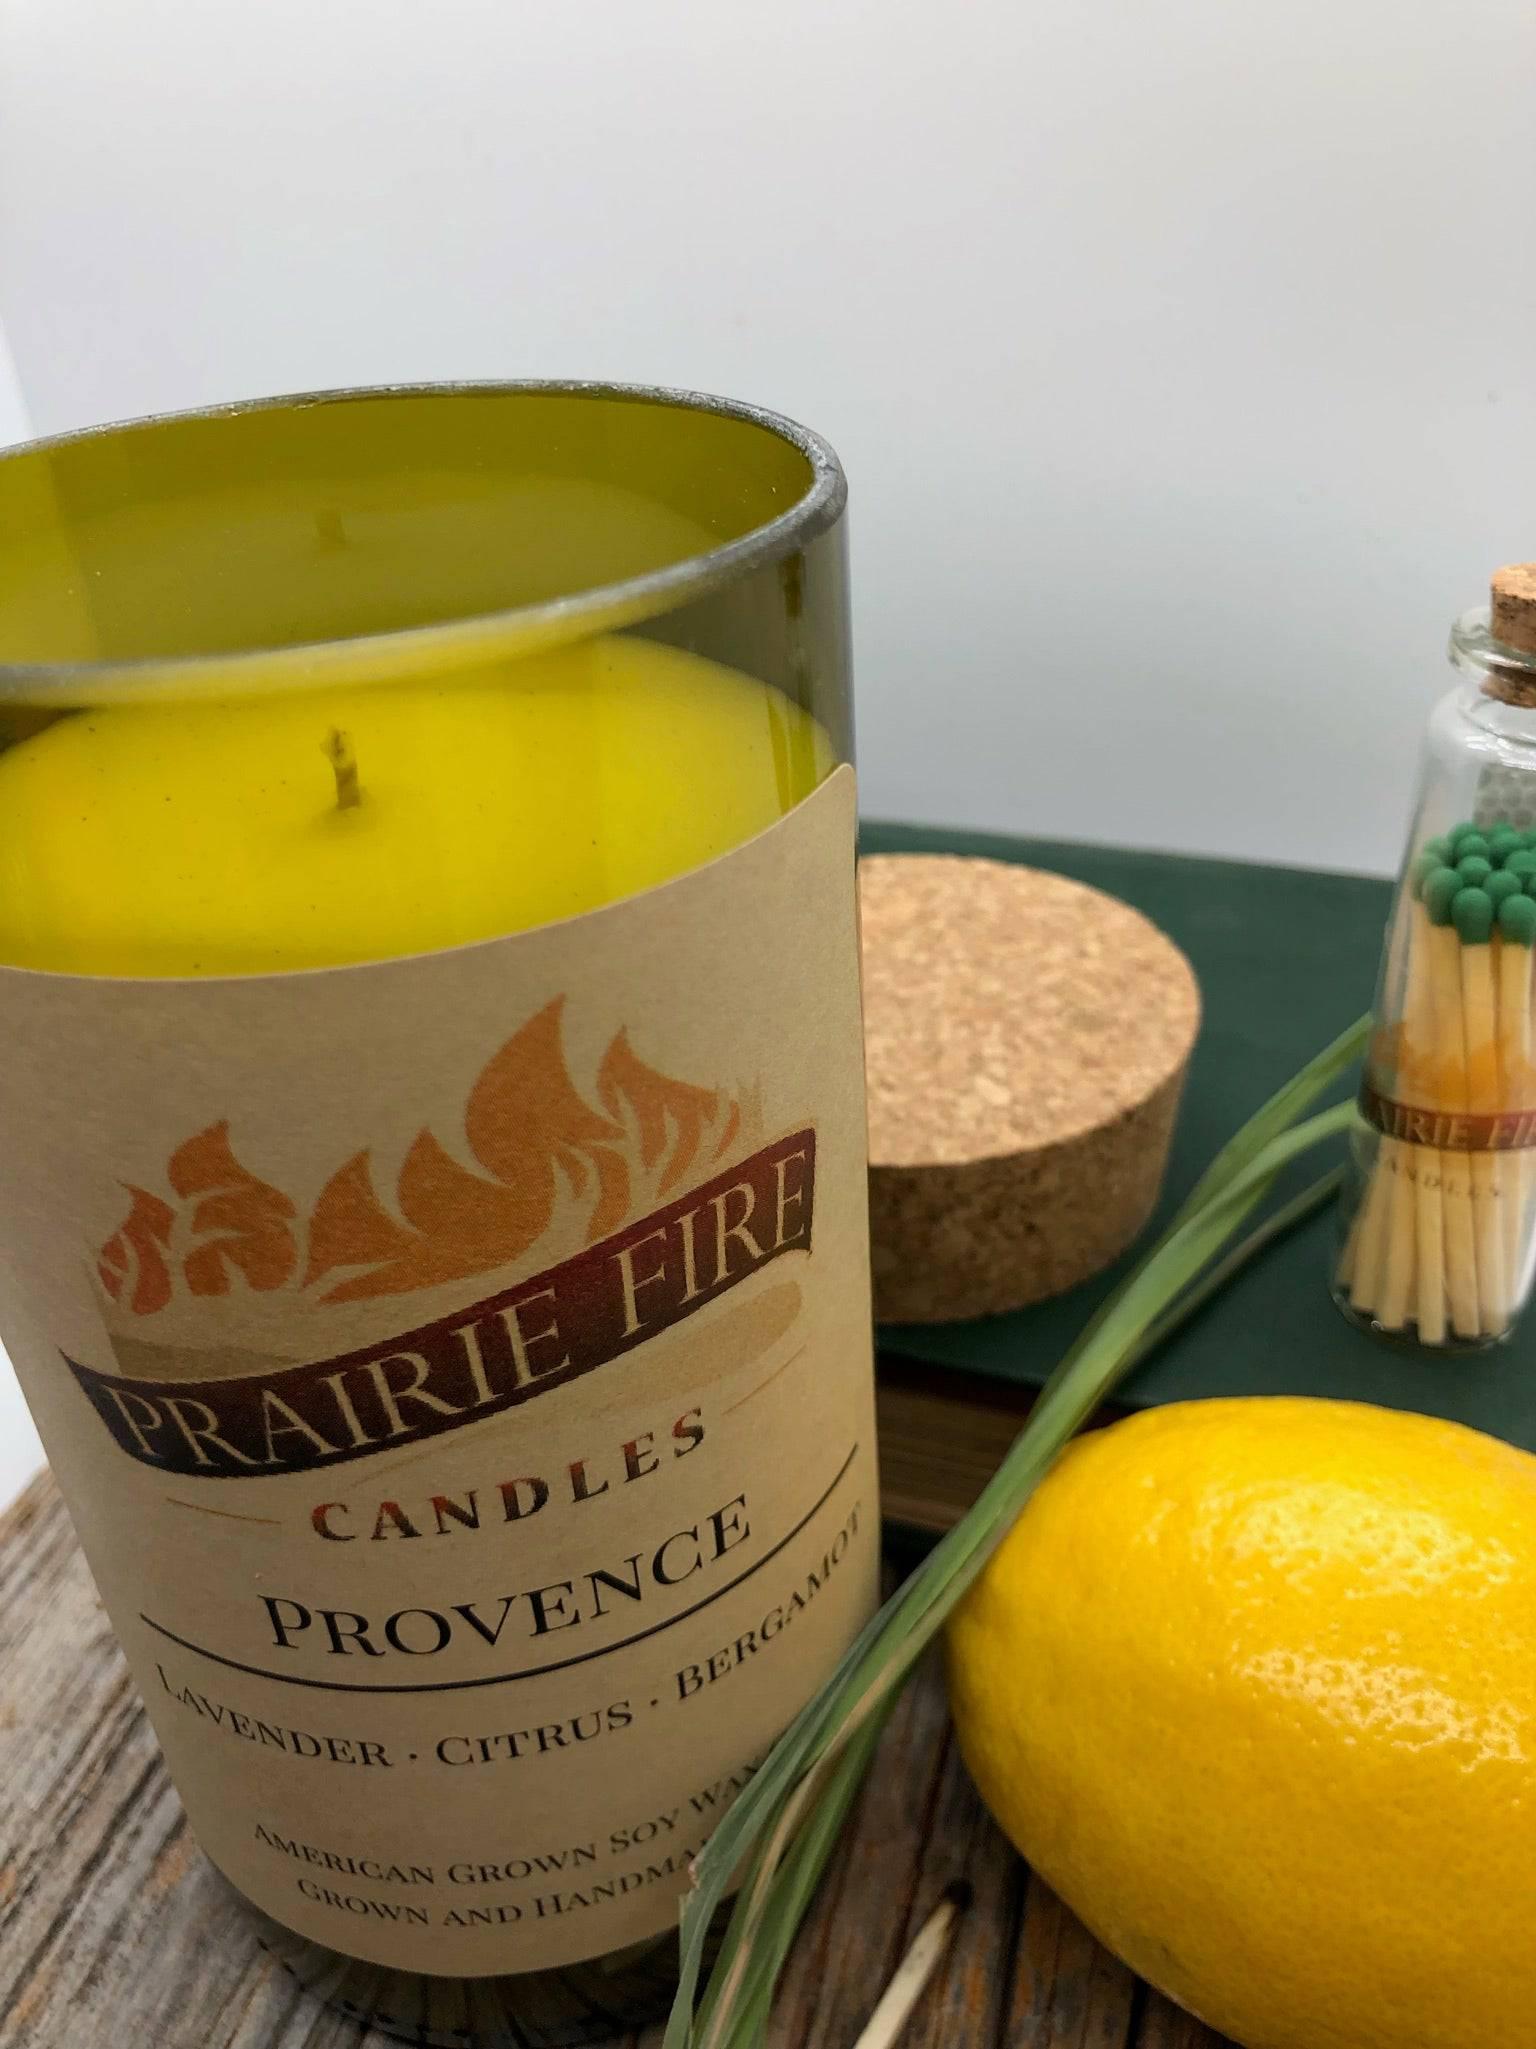 Provence Soy Wax Candle | Repurposed Wine Bottle Candle Natural Cork | Handmade in USA Candle | Eco-Friendly Candle | Non-Toxic Soy Candle - Prairie Fire Candles